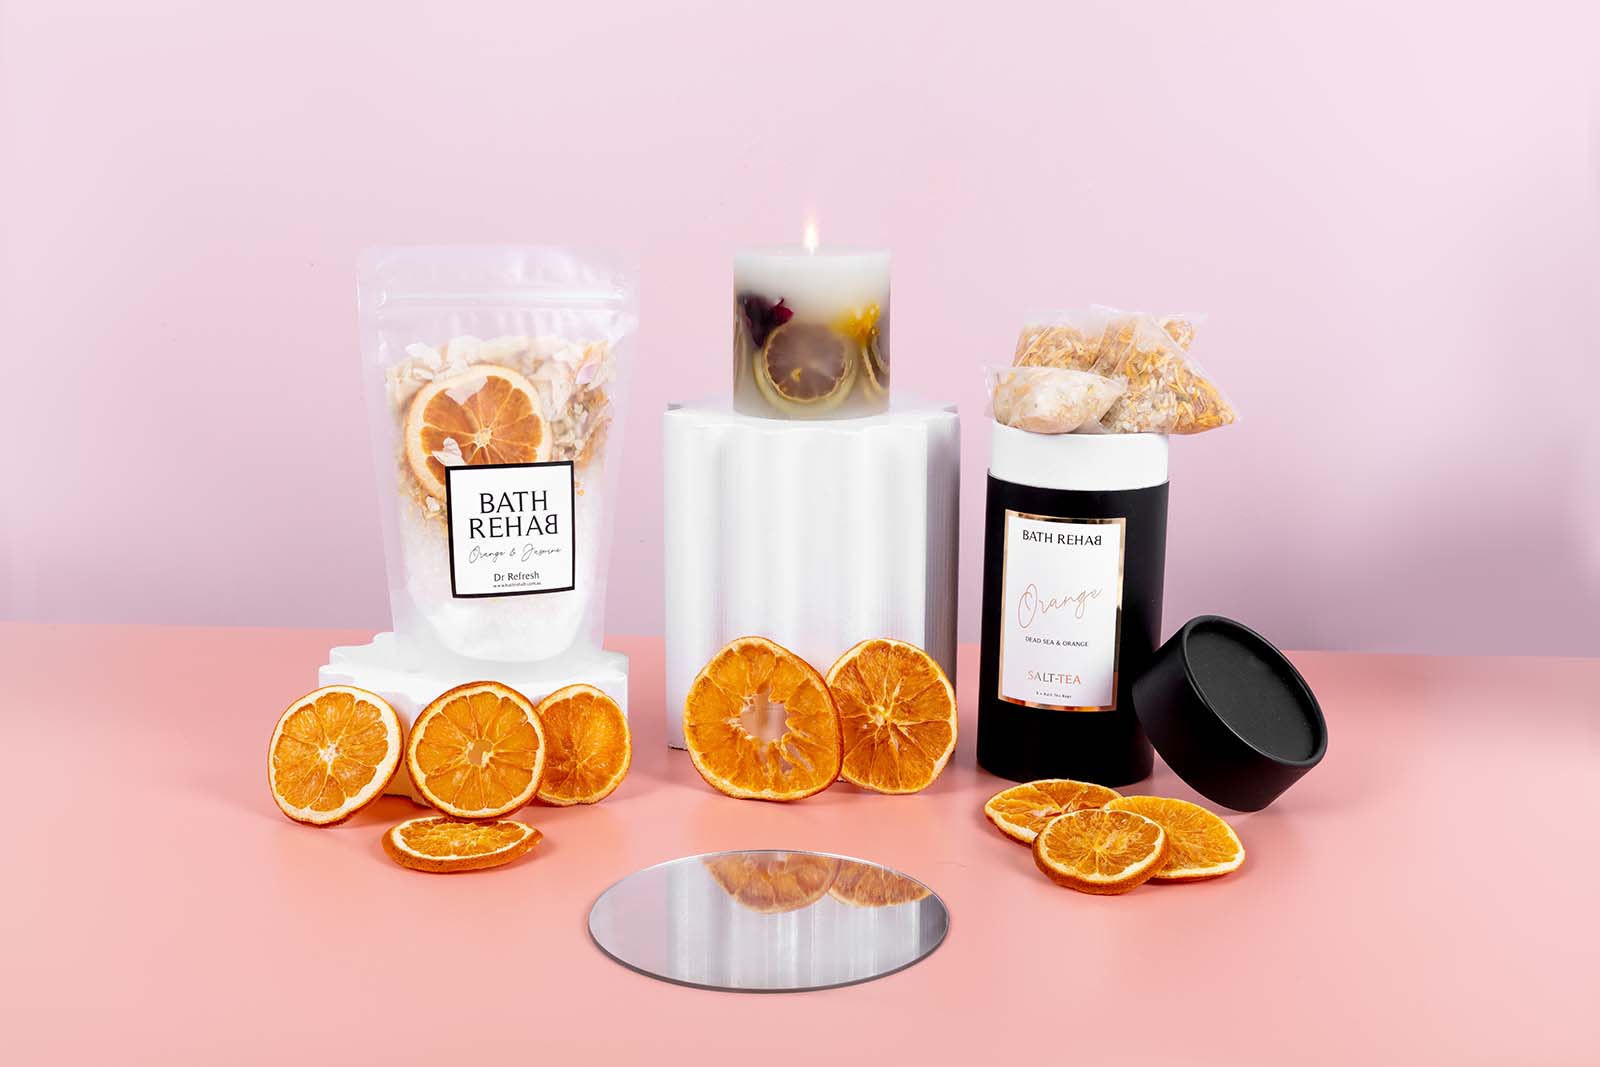 Colorful Styled Images for a Bath Soak Brand Bath Rehab. Styled Product Photography by Megzie Makes